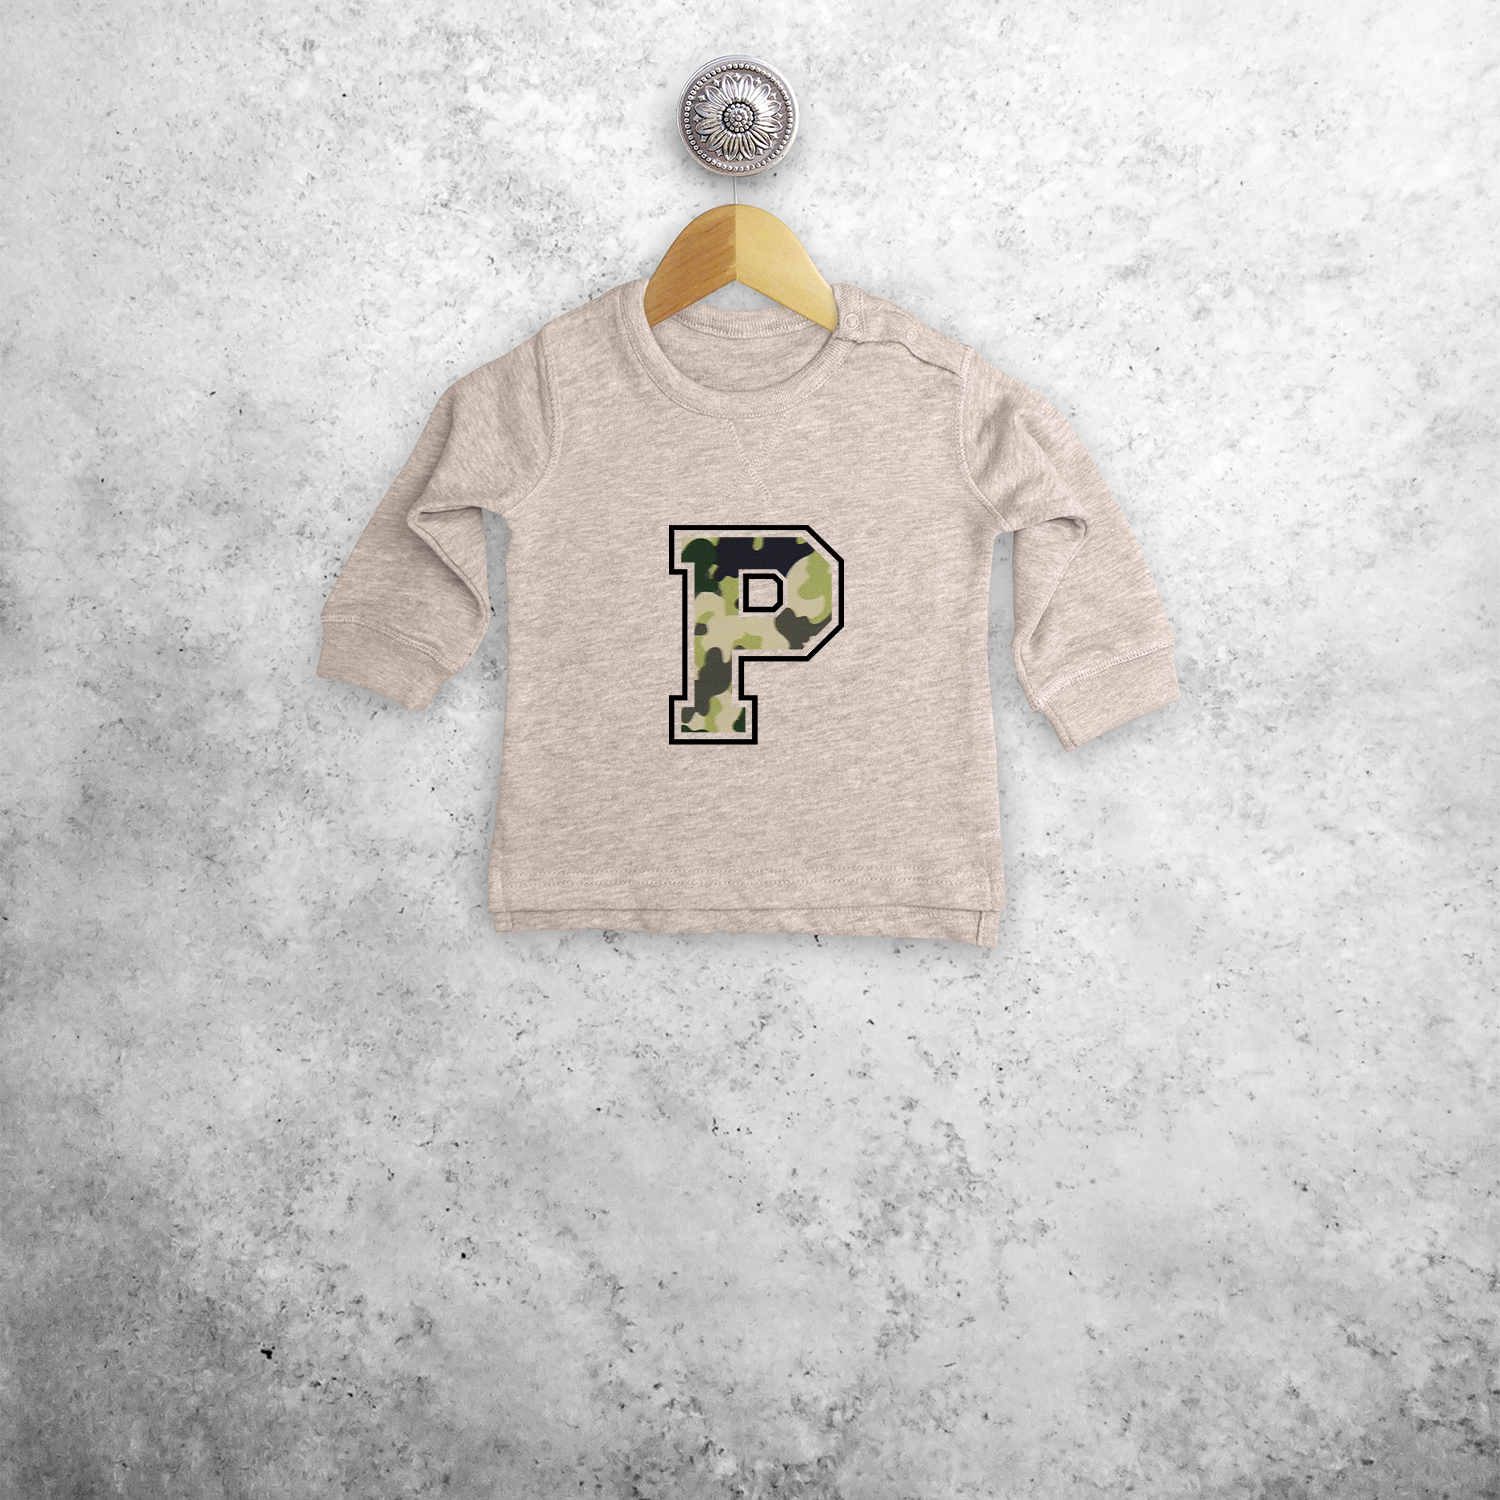 Camouflage letter baby sweater